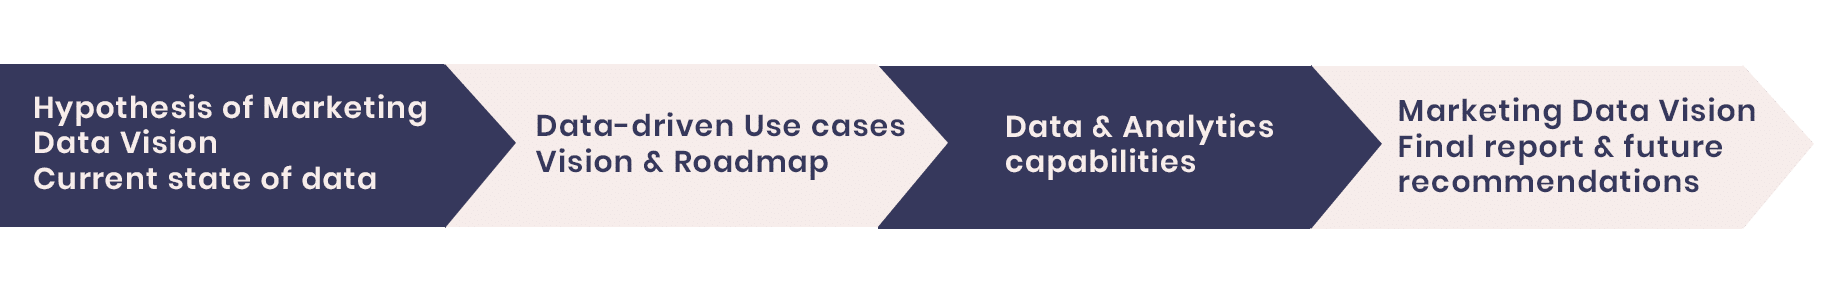 standardised approach for a practical Marketing Data Vision